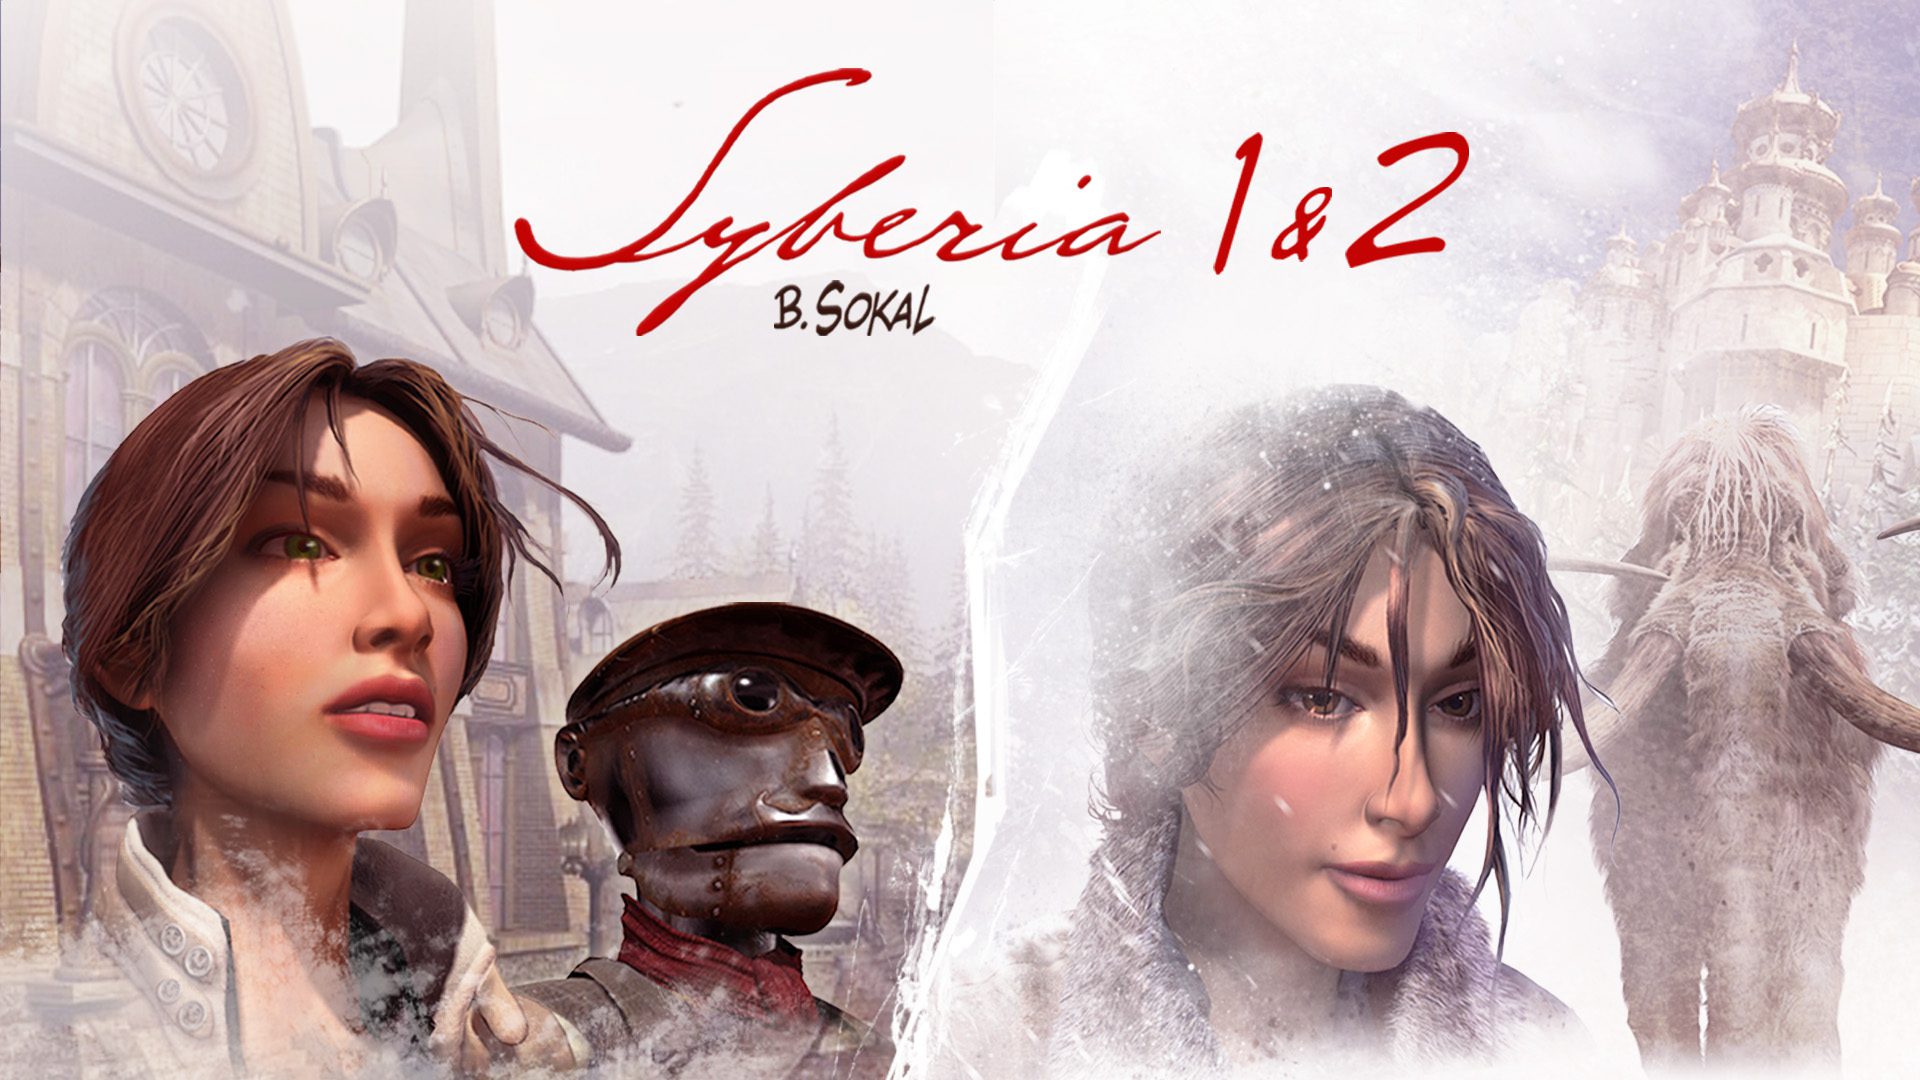 Syberia 1 & 2 Are Free On GOG